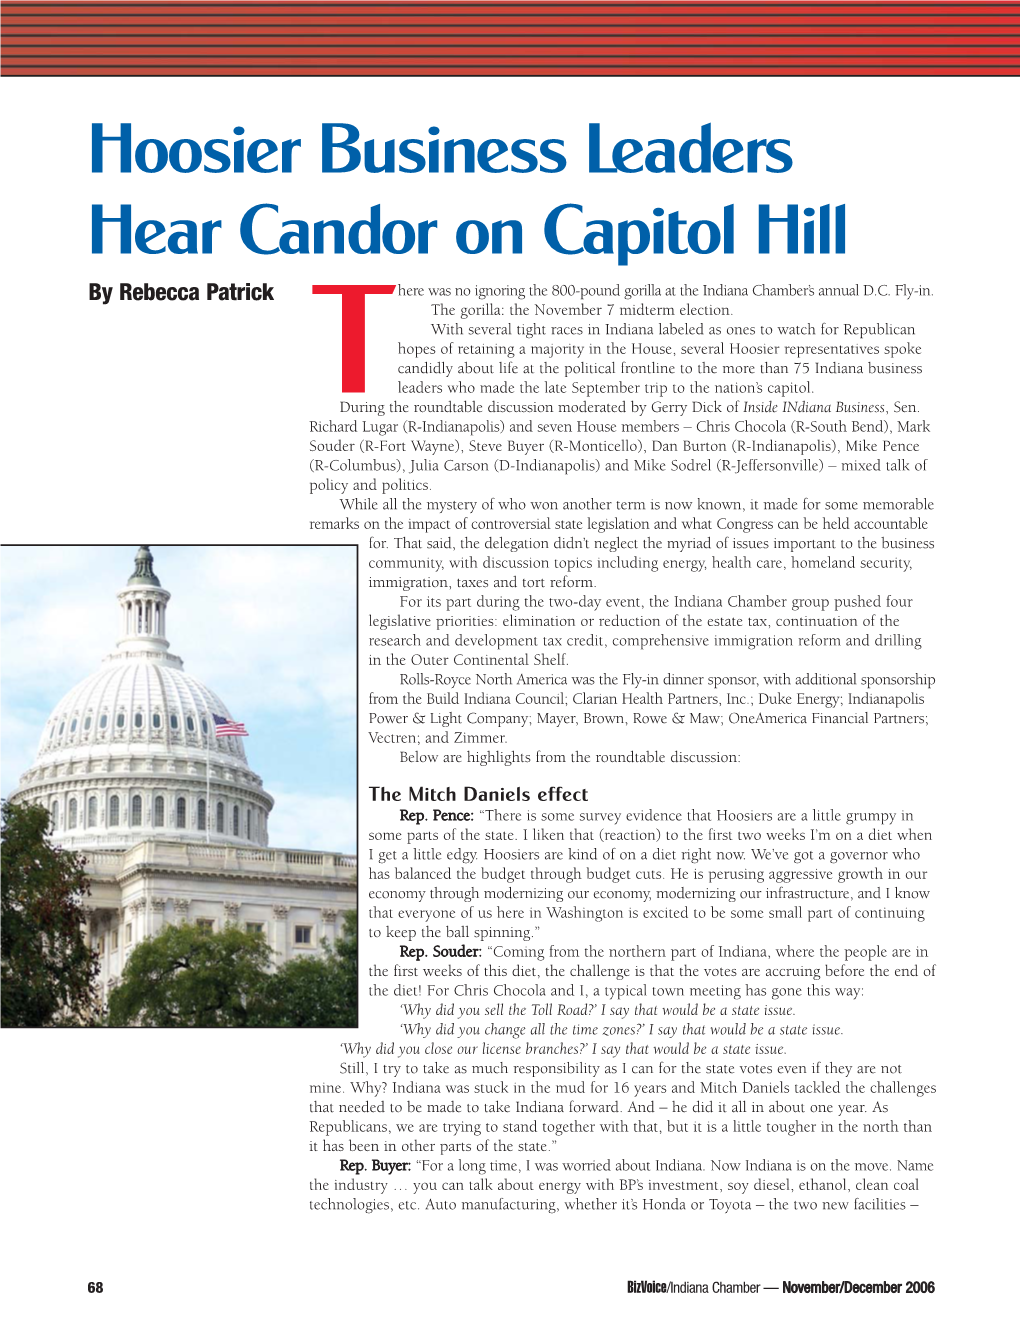 Hoosier Business Leaders Hear Candor on Capitol Hill by Rebecca Patrick Here Was No Ignoring the 800-Pound Gorilla at the Indiana Chamber’S Annual D.C